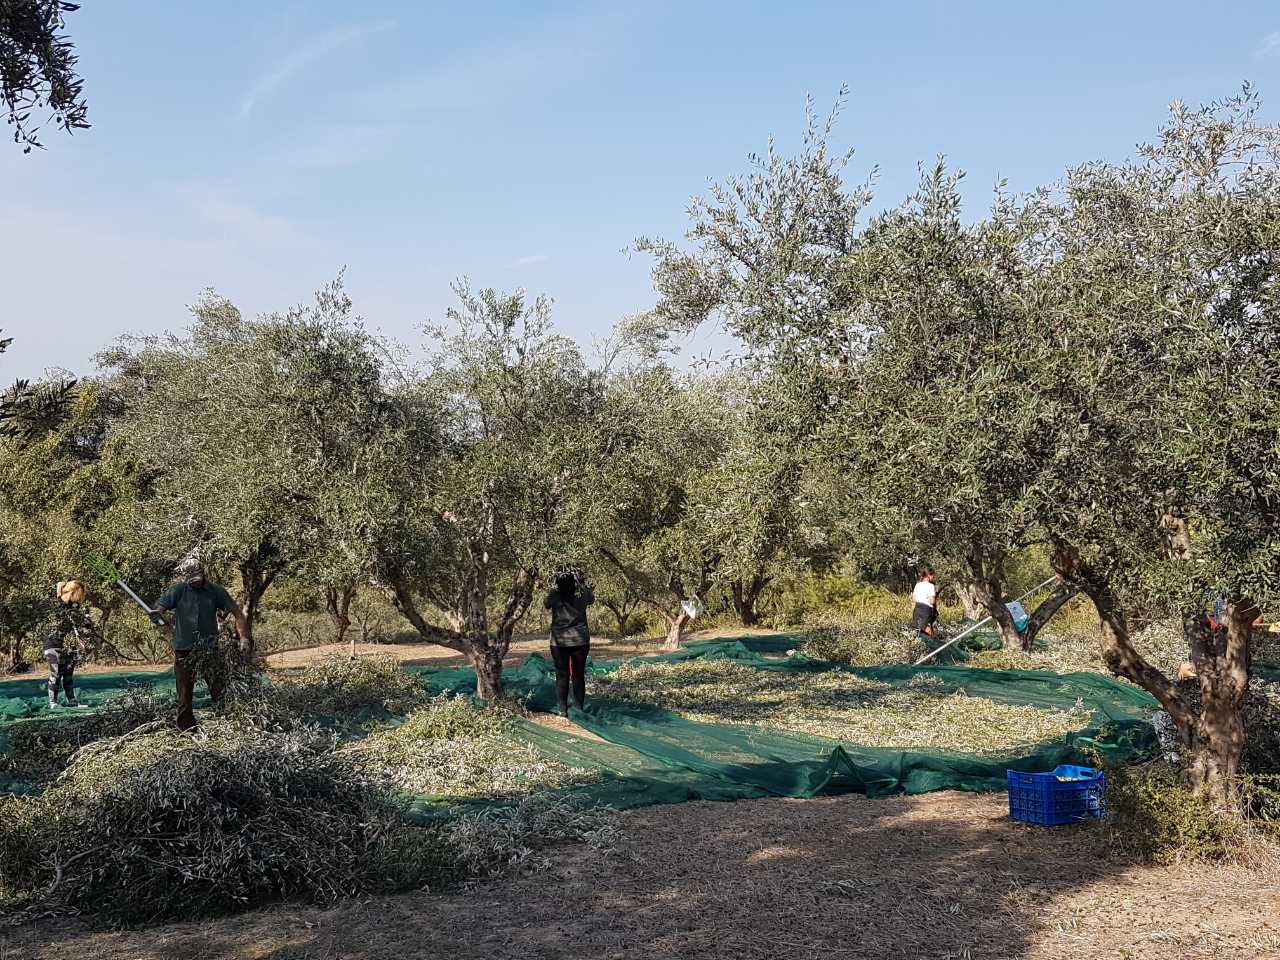 A beautiful olive grove with the Ionian Sea shining in the distance where farmers are harvesting the olives.